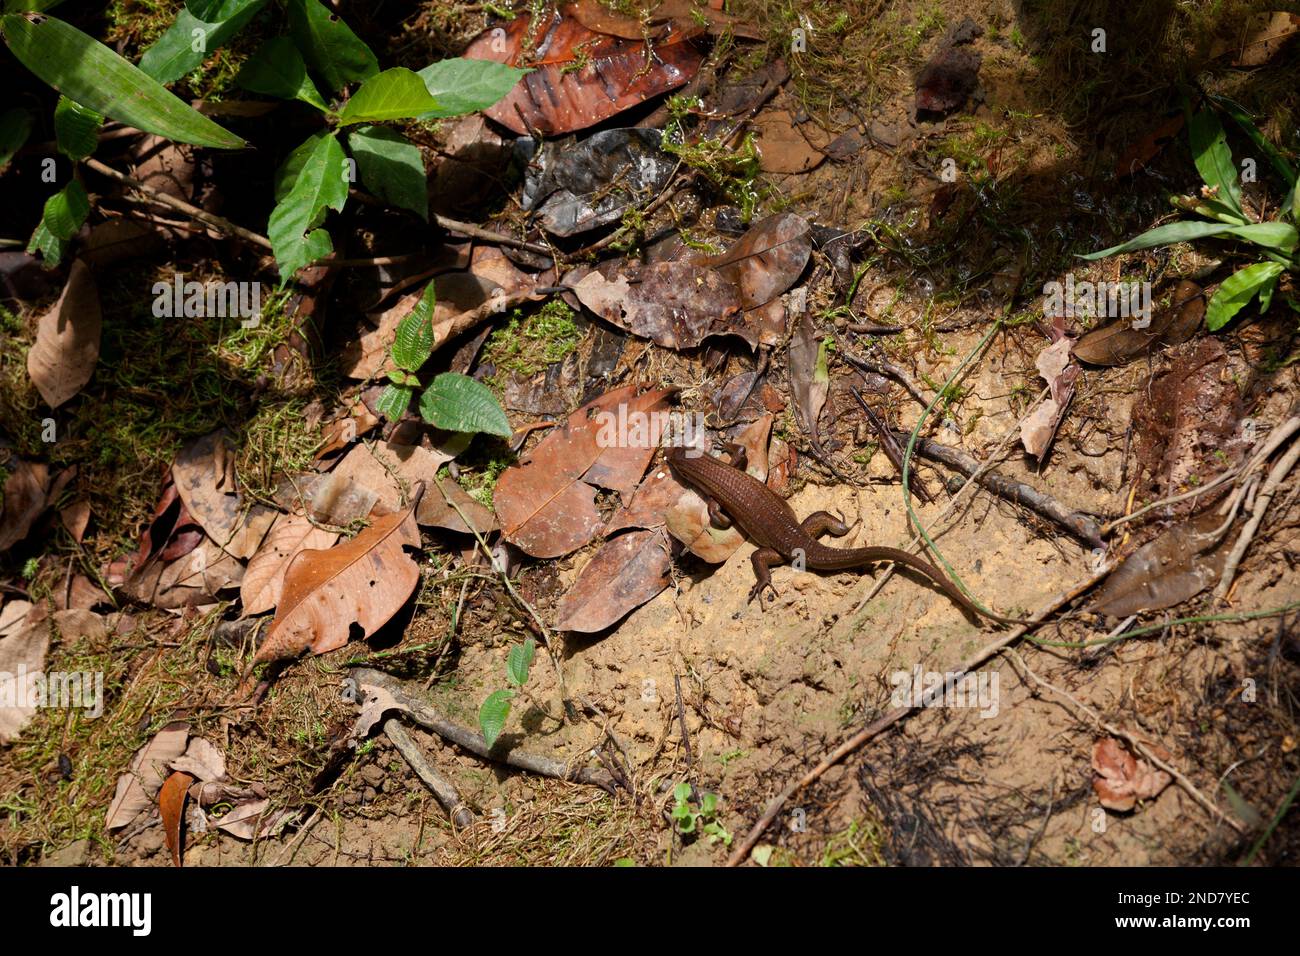 Eutropis multifasciata, commonly known as the East Indian brown mabuya, many-lined sun skink, many-striped skink, common sun skink or (ambiguously) as Stock Photo